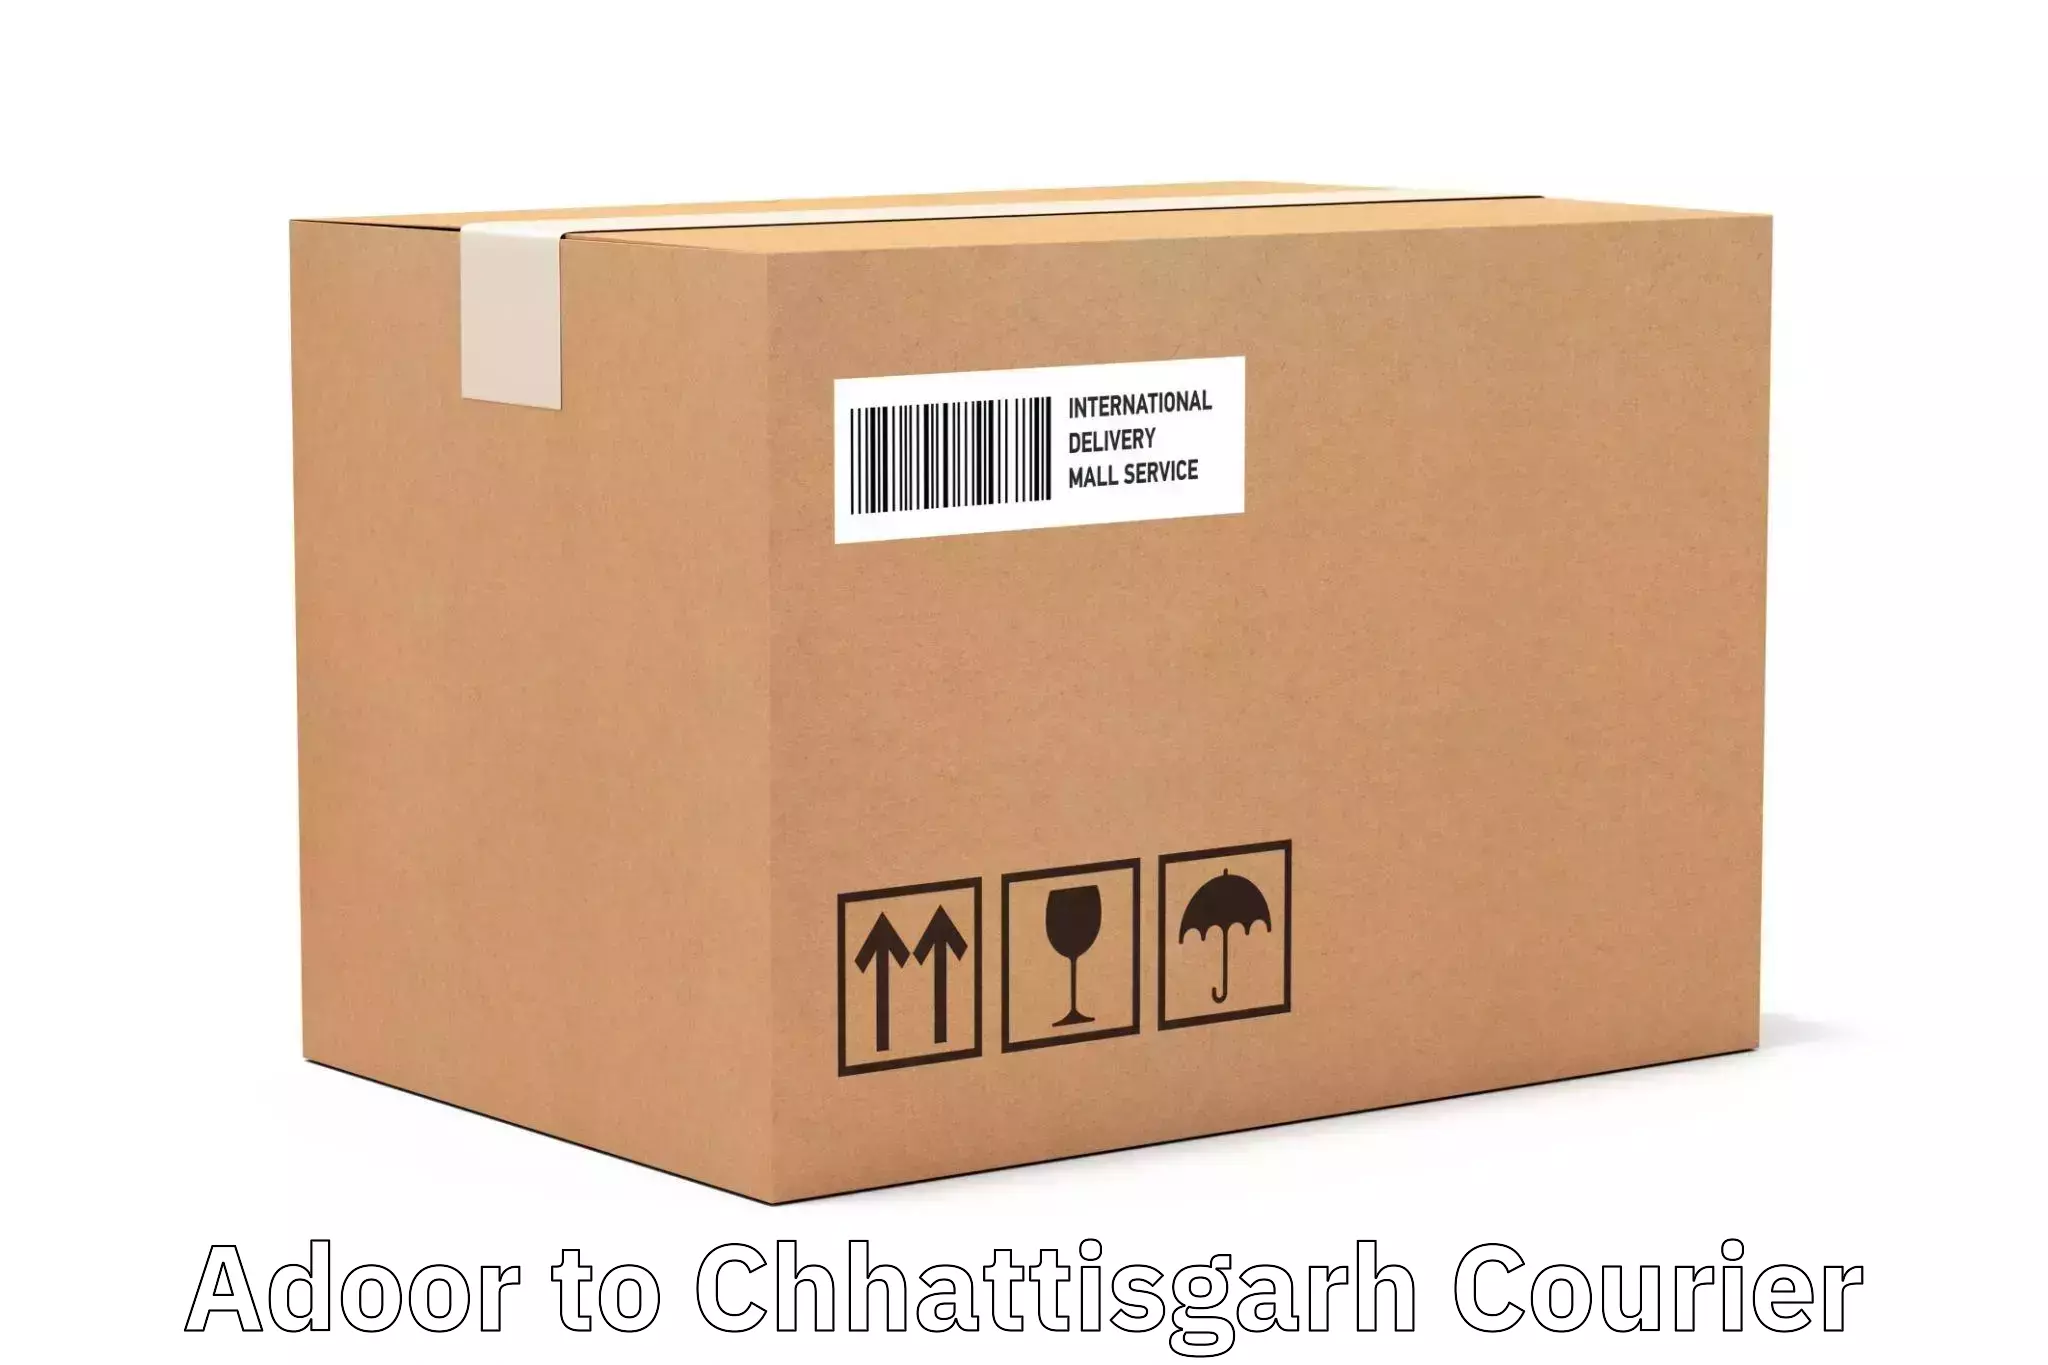 Parcel service for businesses Adoor to Chhattisgarh